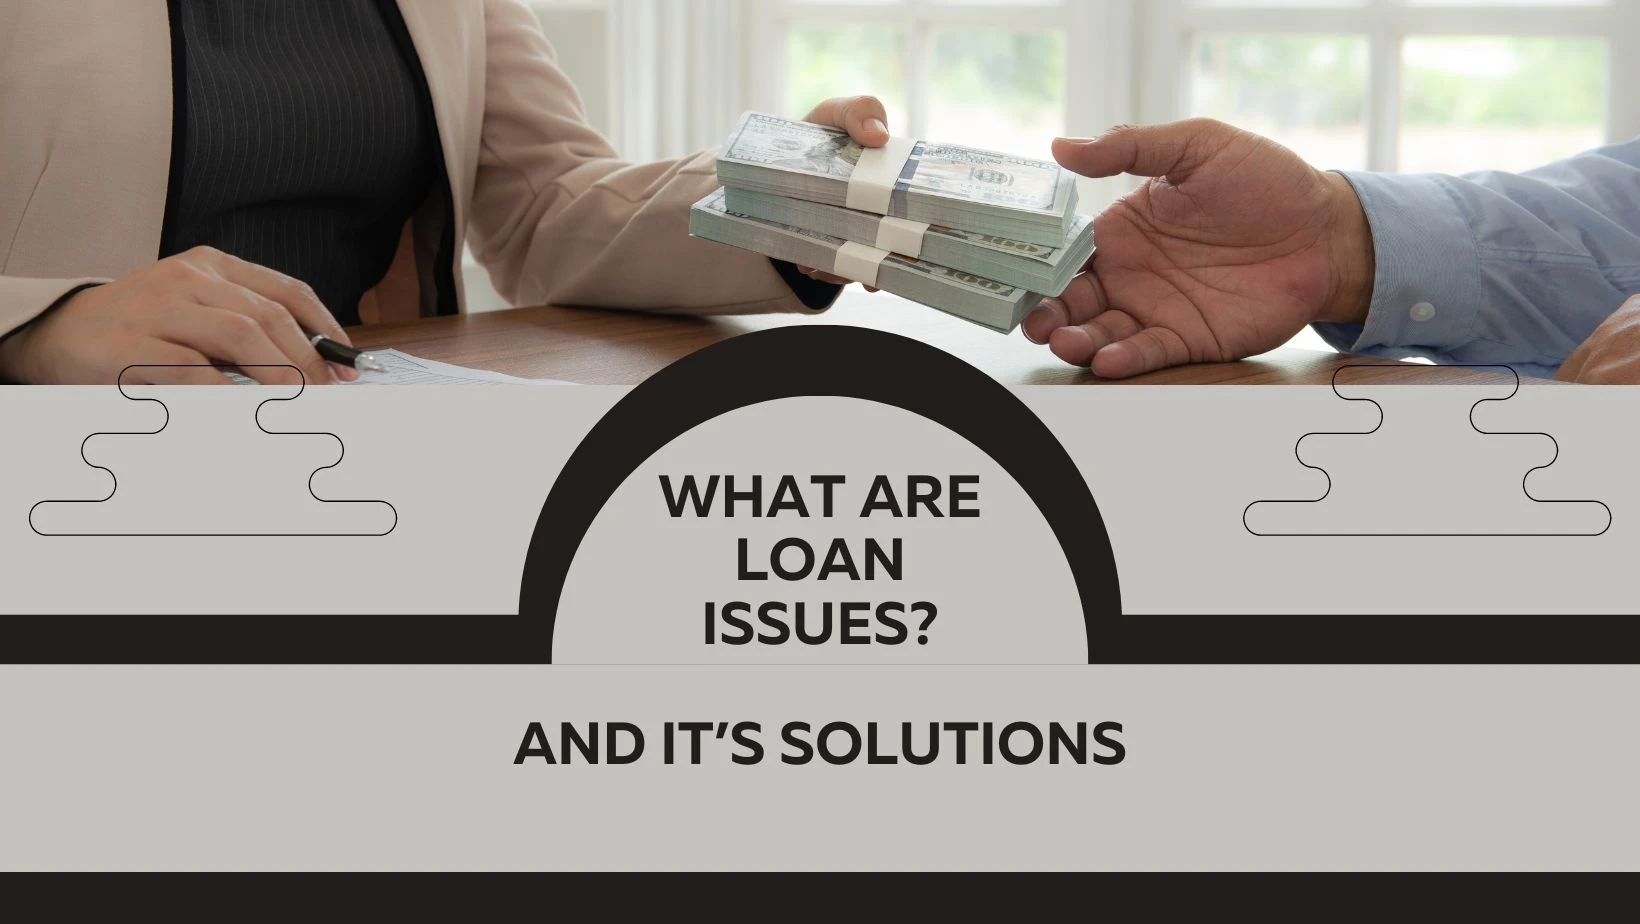 What are loan issues?